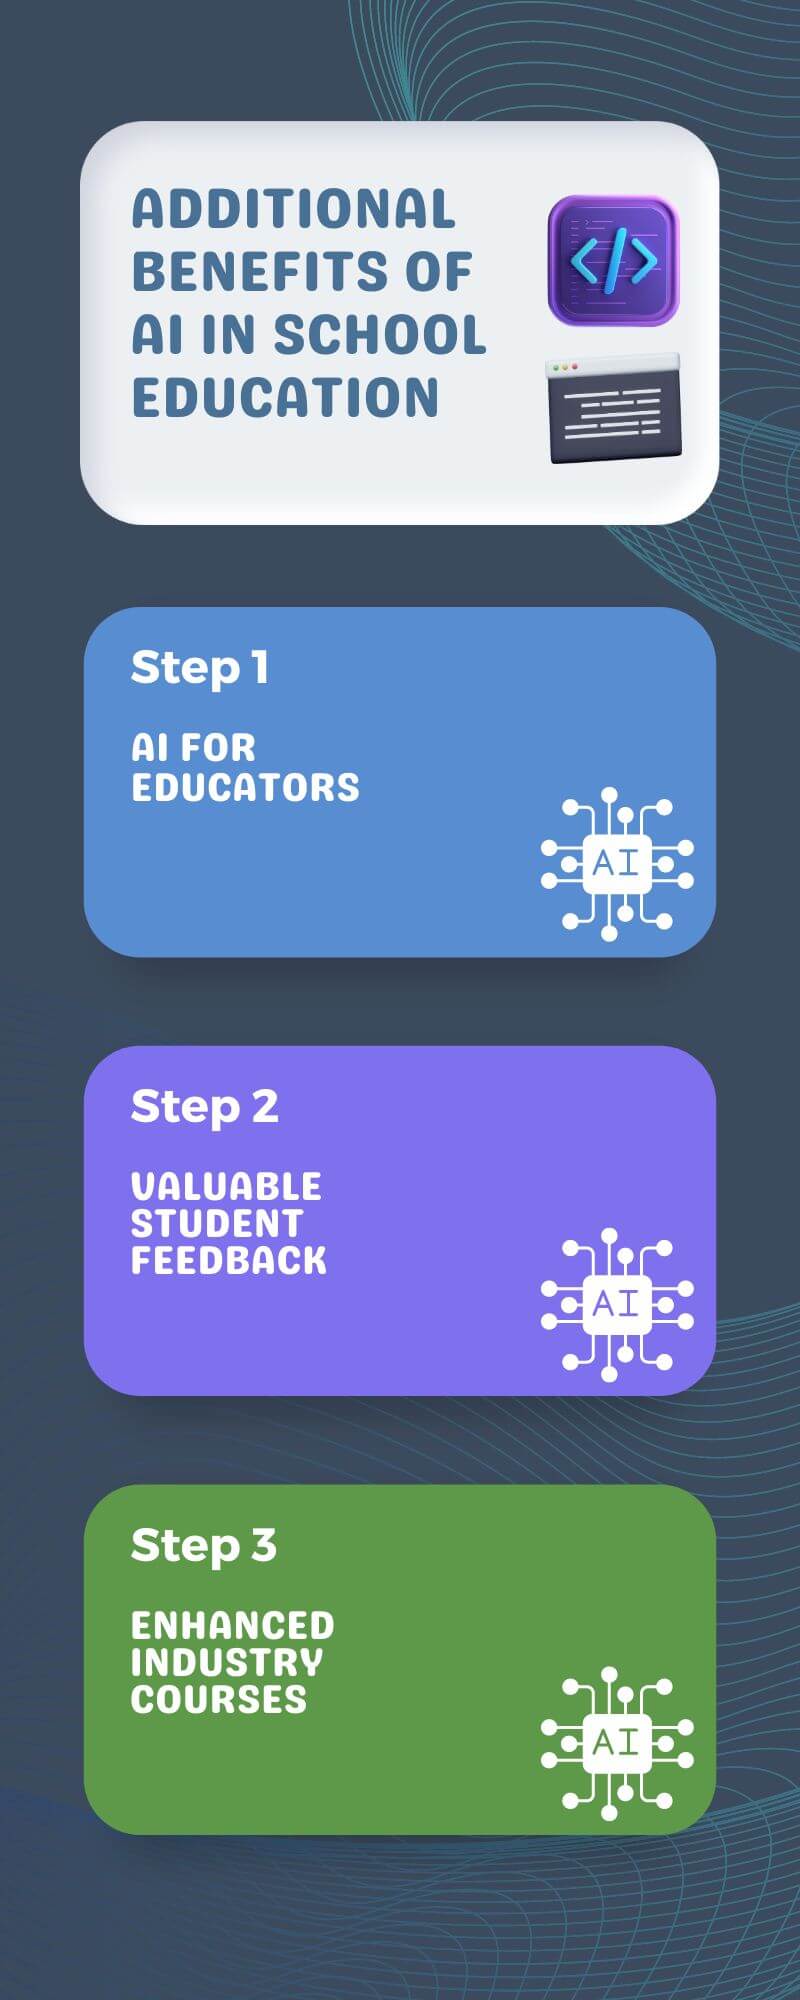 Additional Benefits of AI in School Education